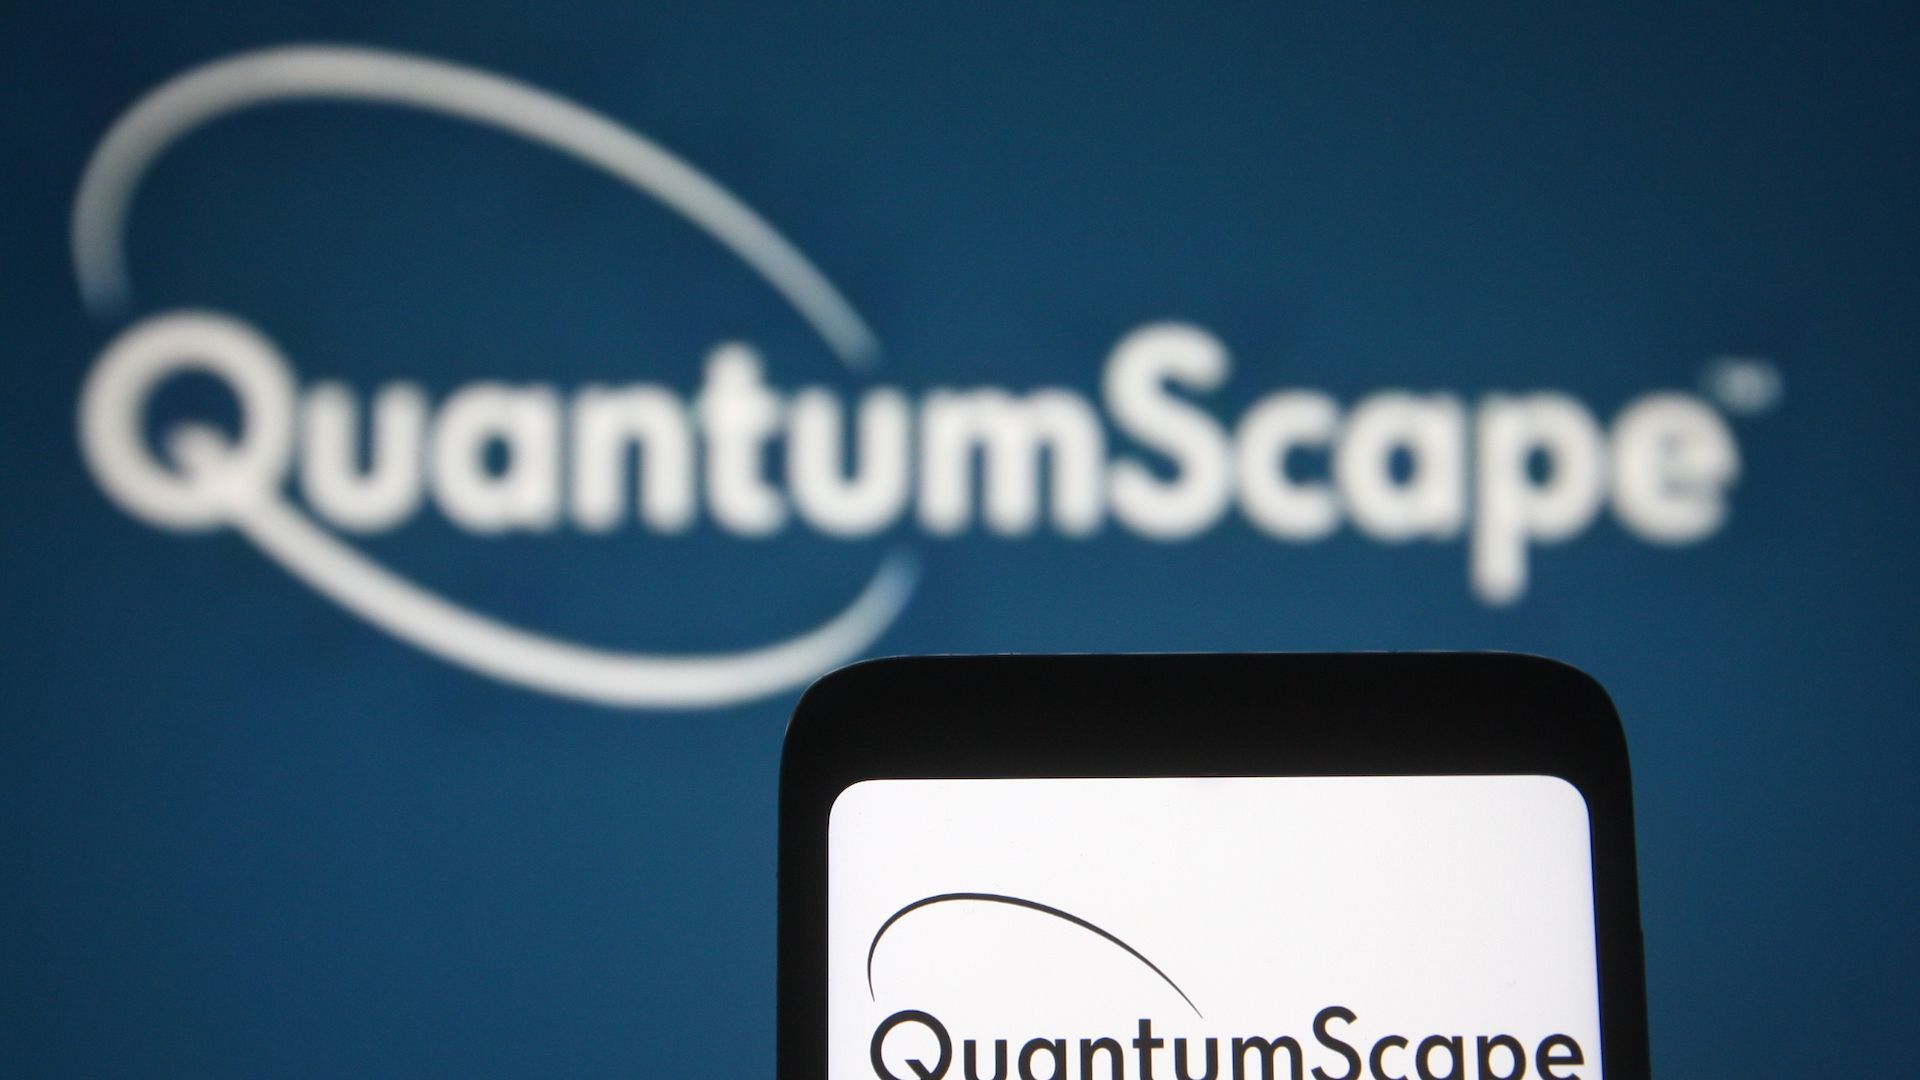 Image of the QuantumScape logo